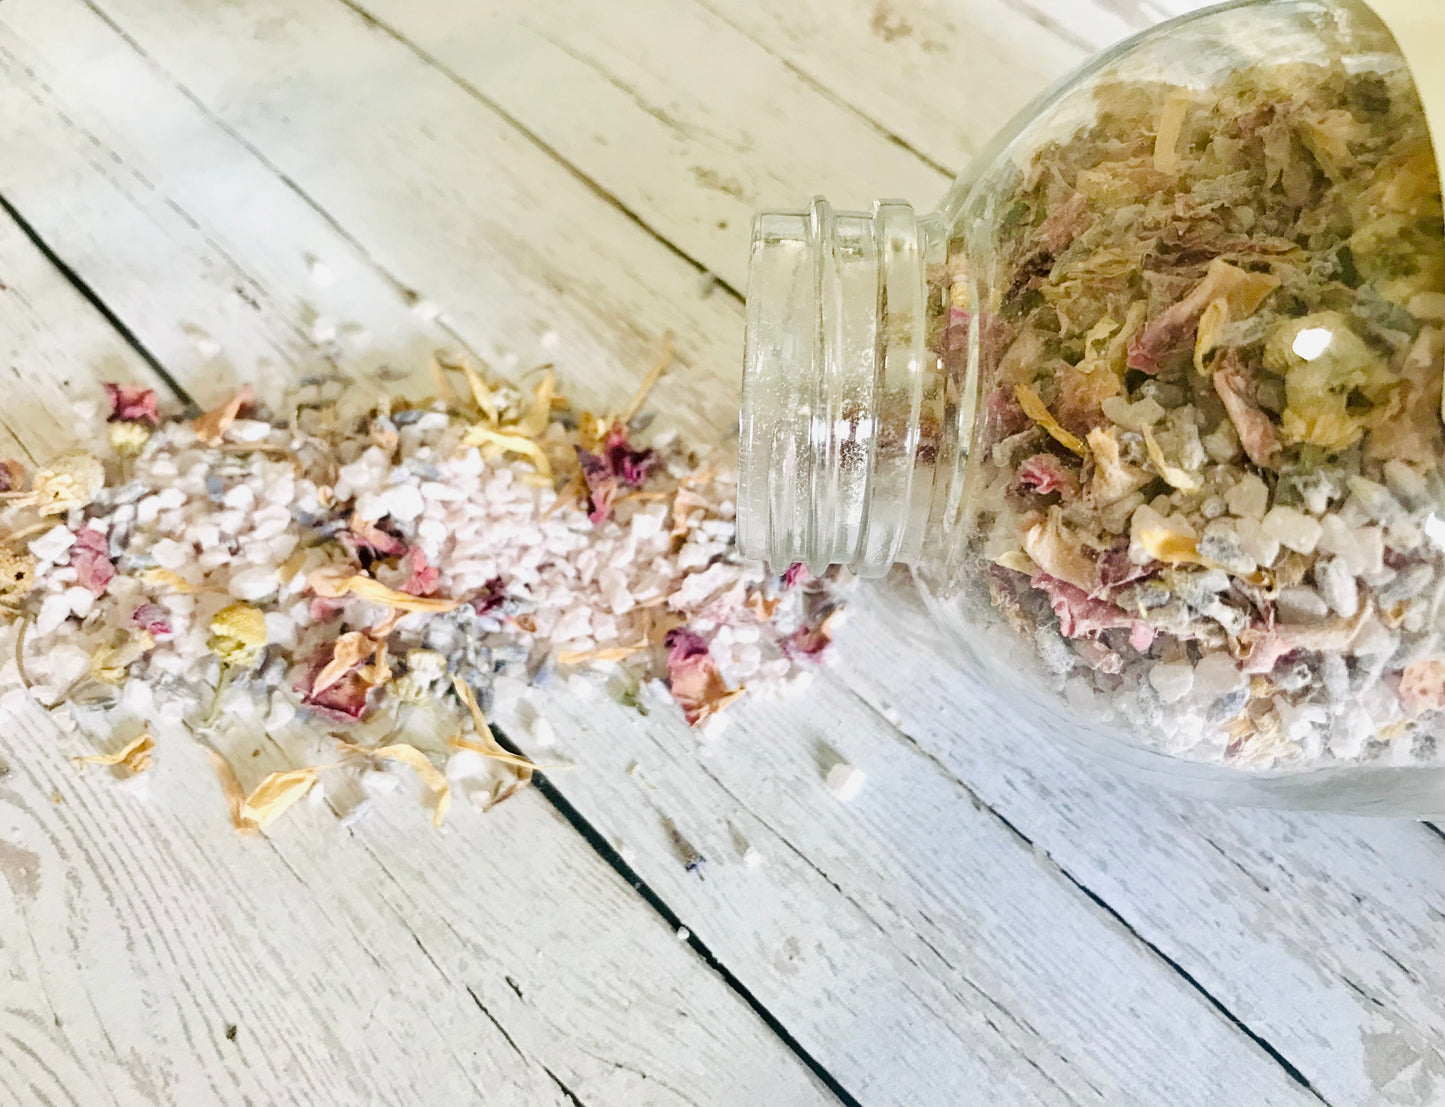 Botanicals + Pink Clay Relaxing Bath Soak with Resuable Cotton Drawstring Bath Tea Bag